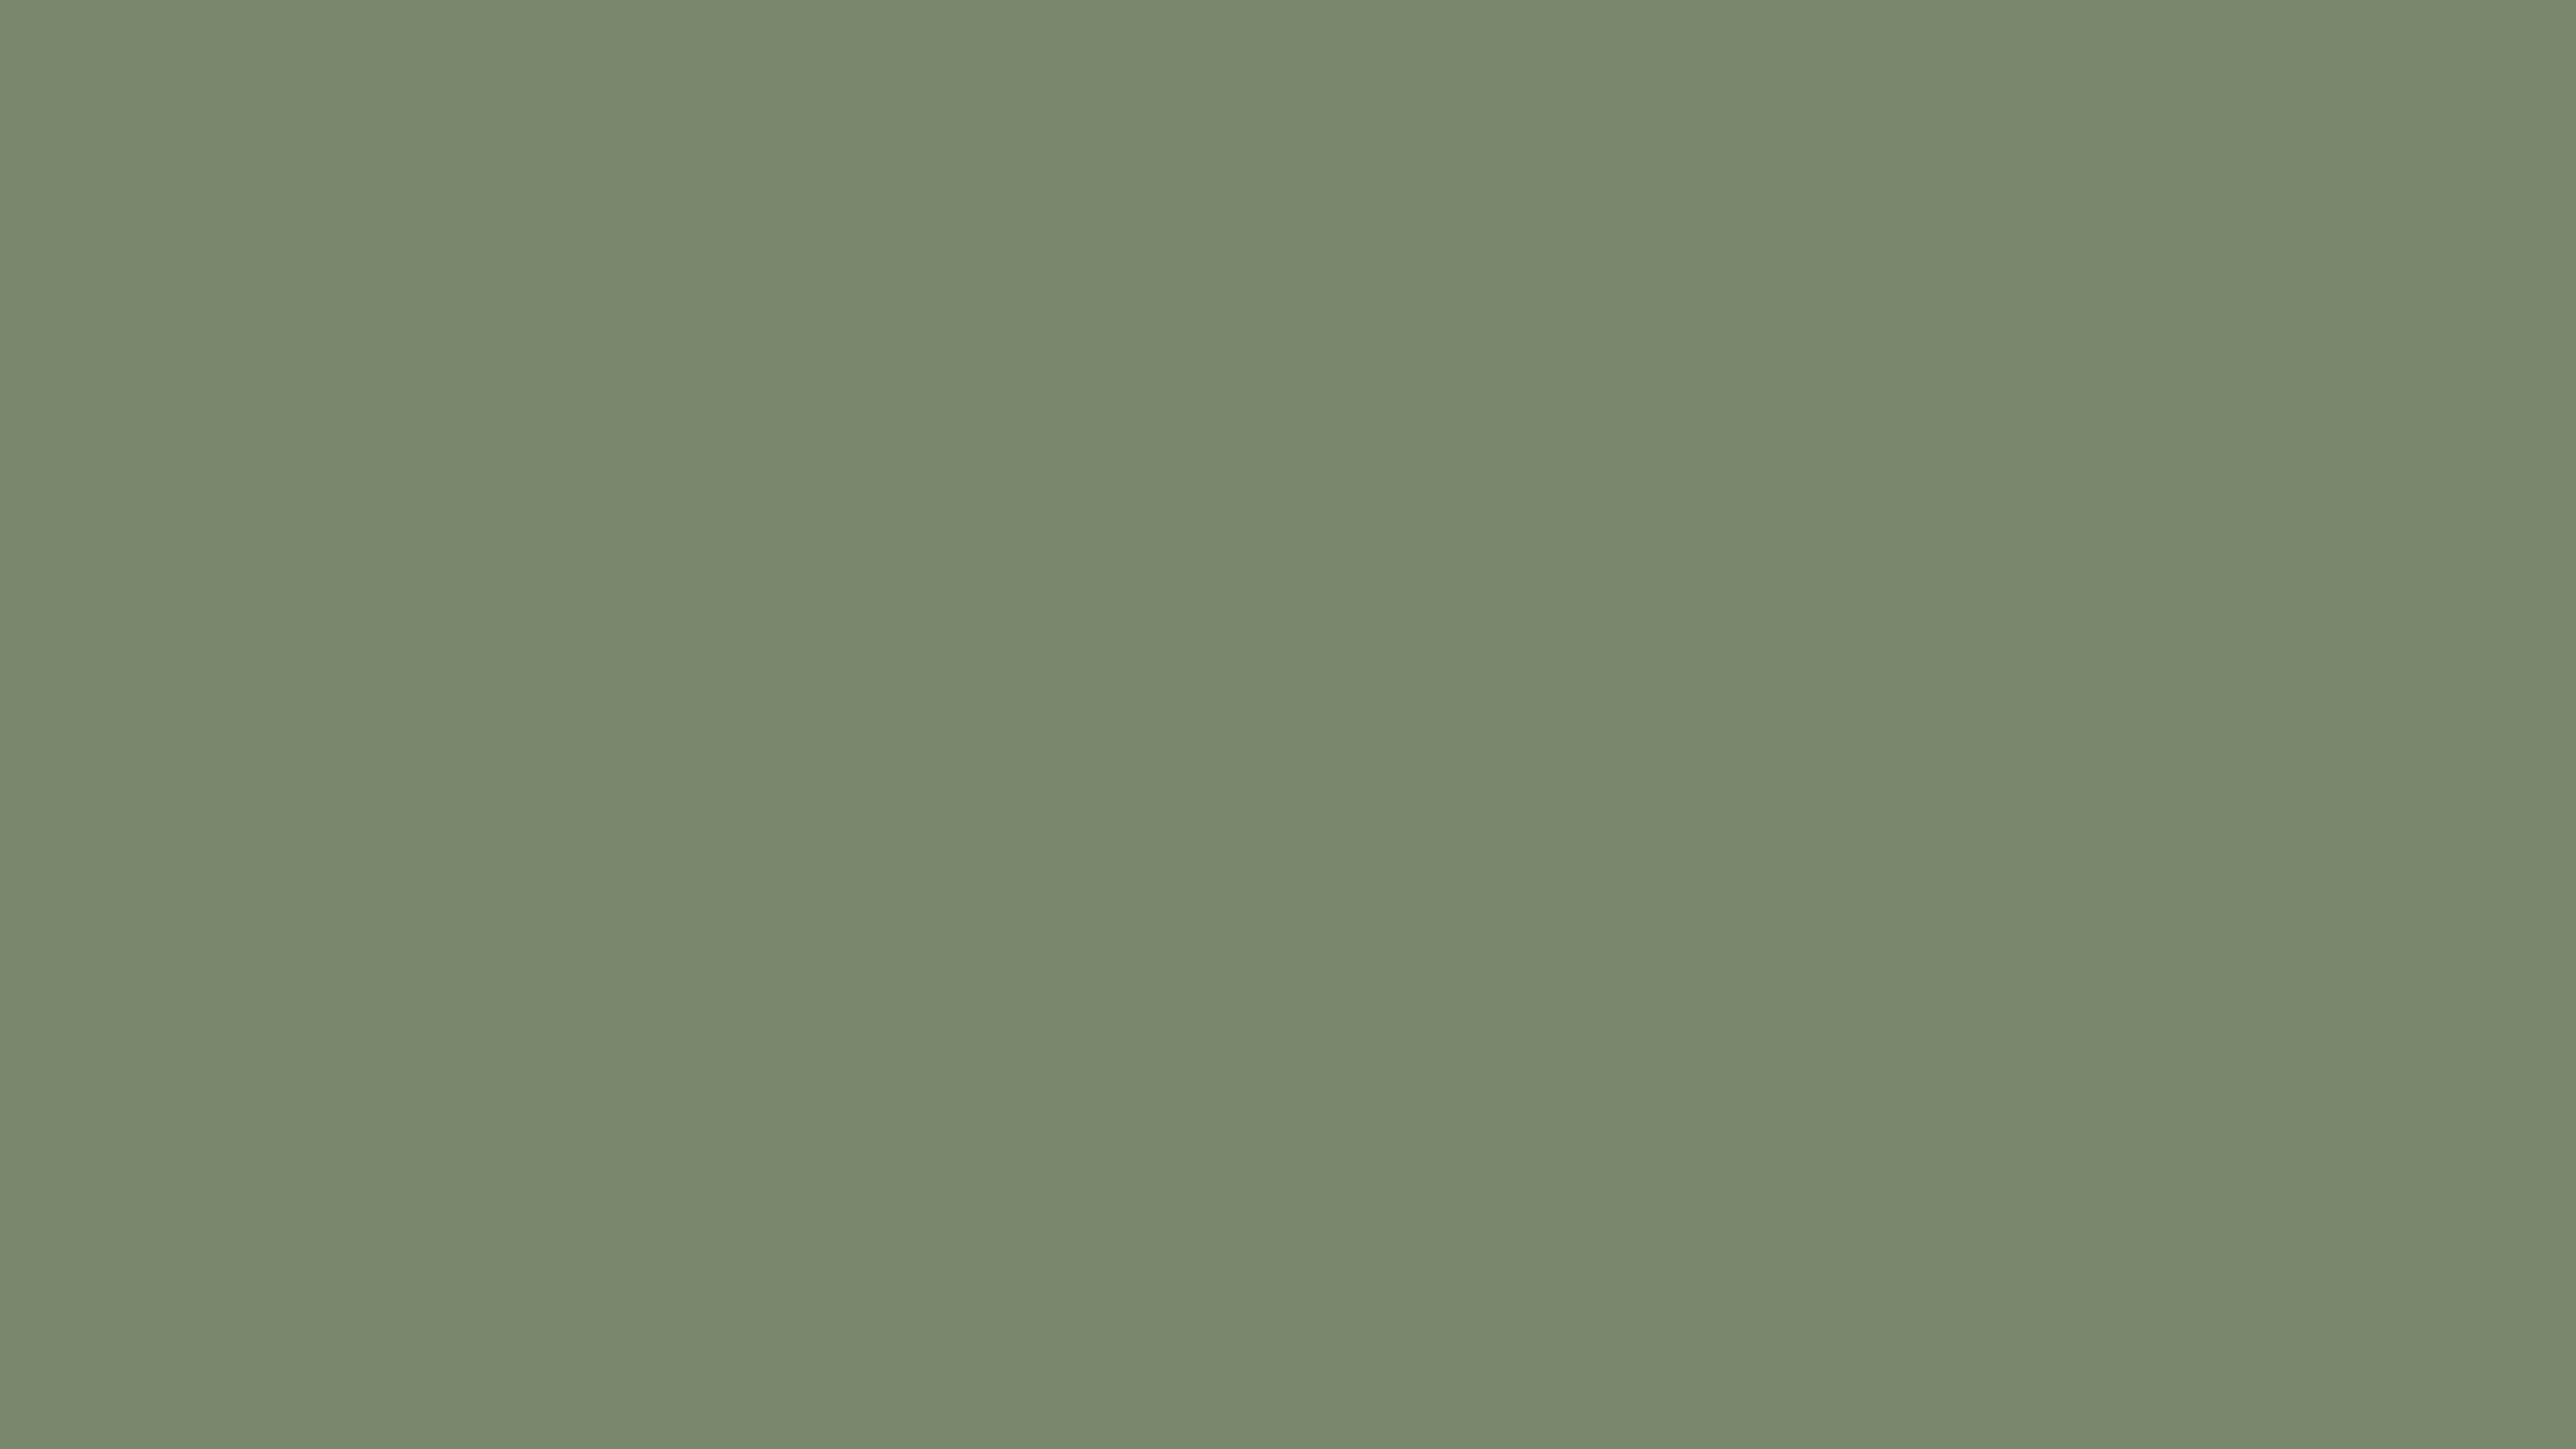 7680x4320 Camouflage Green Solid Color Background